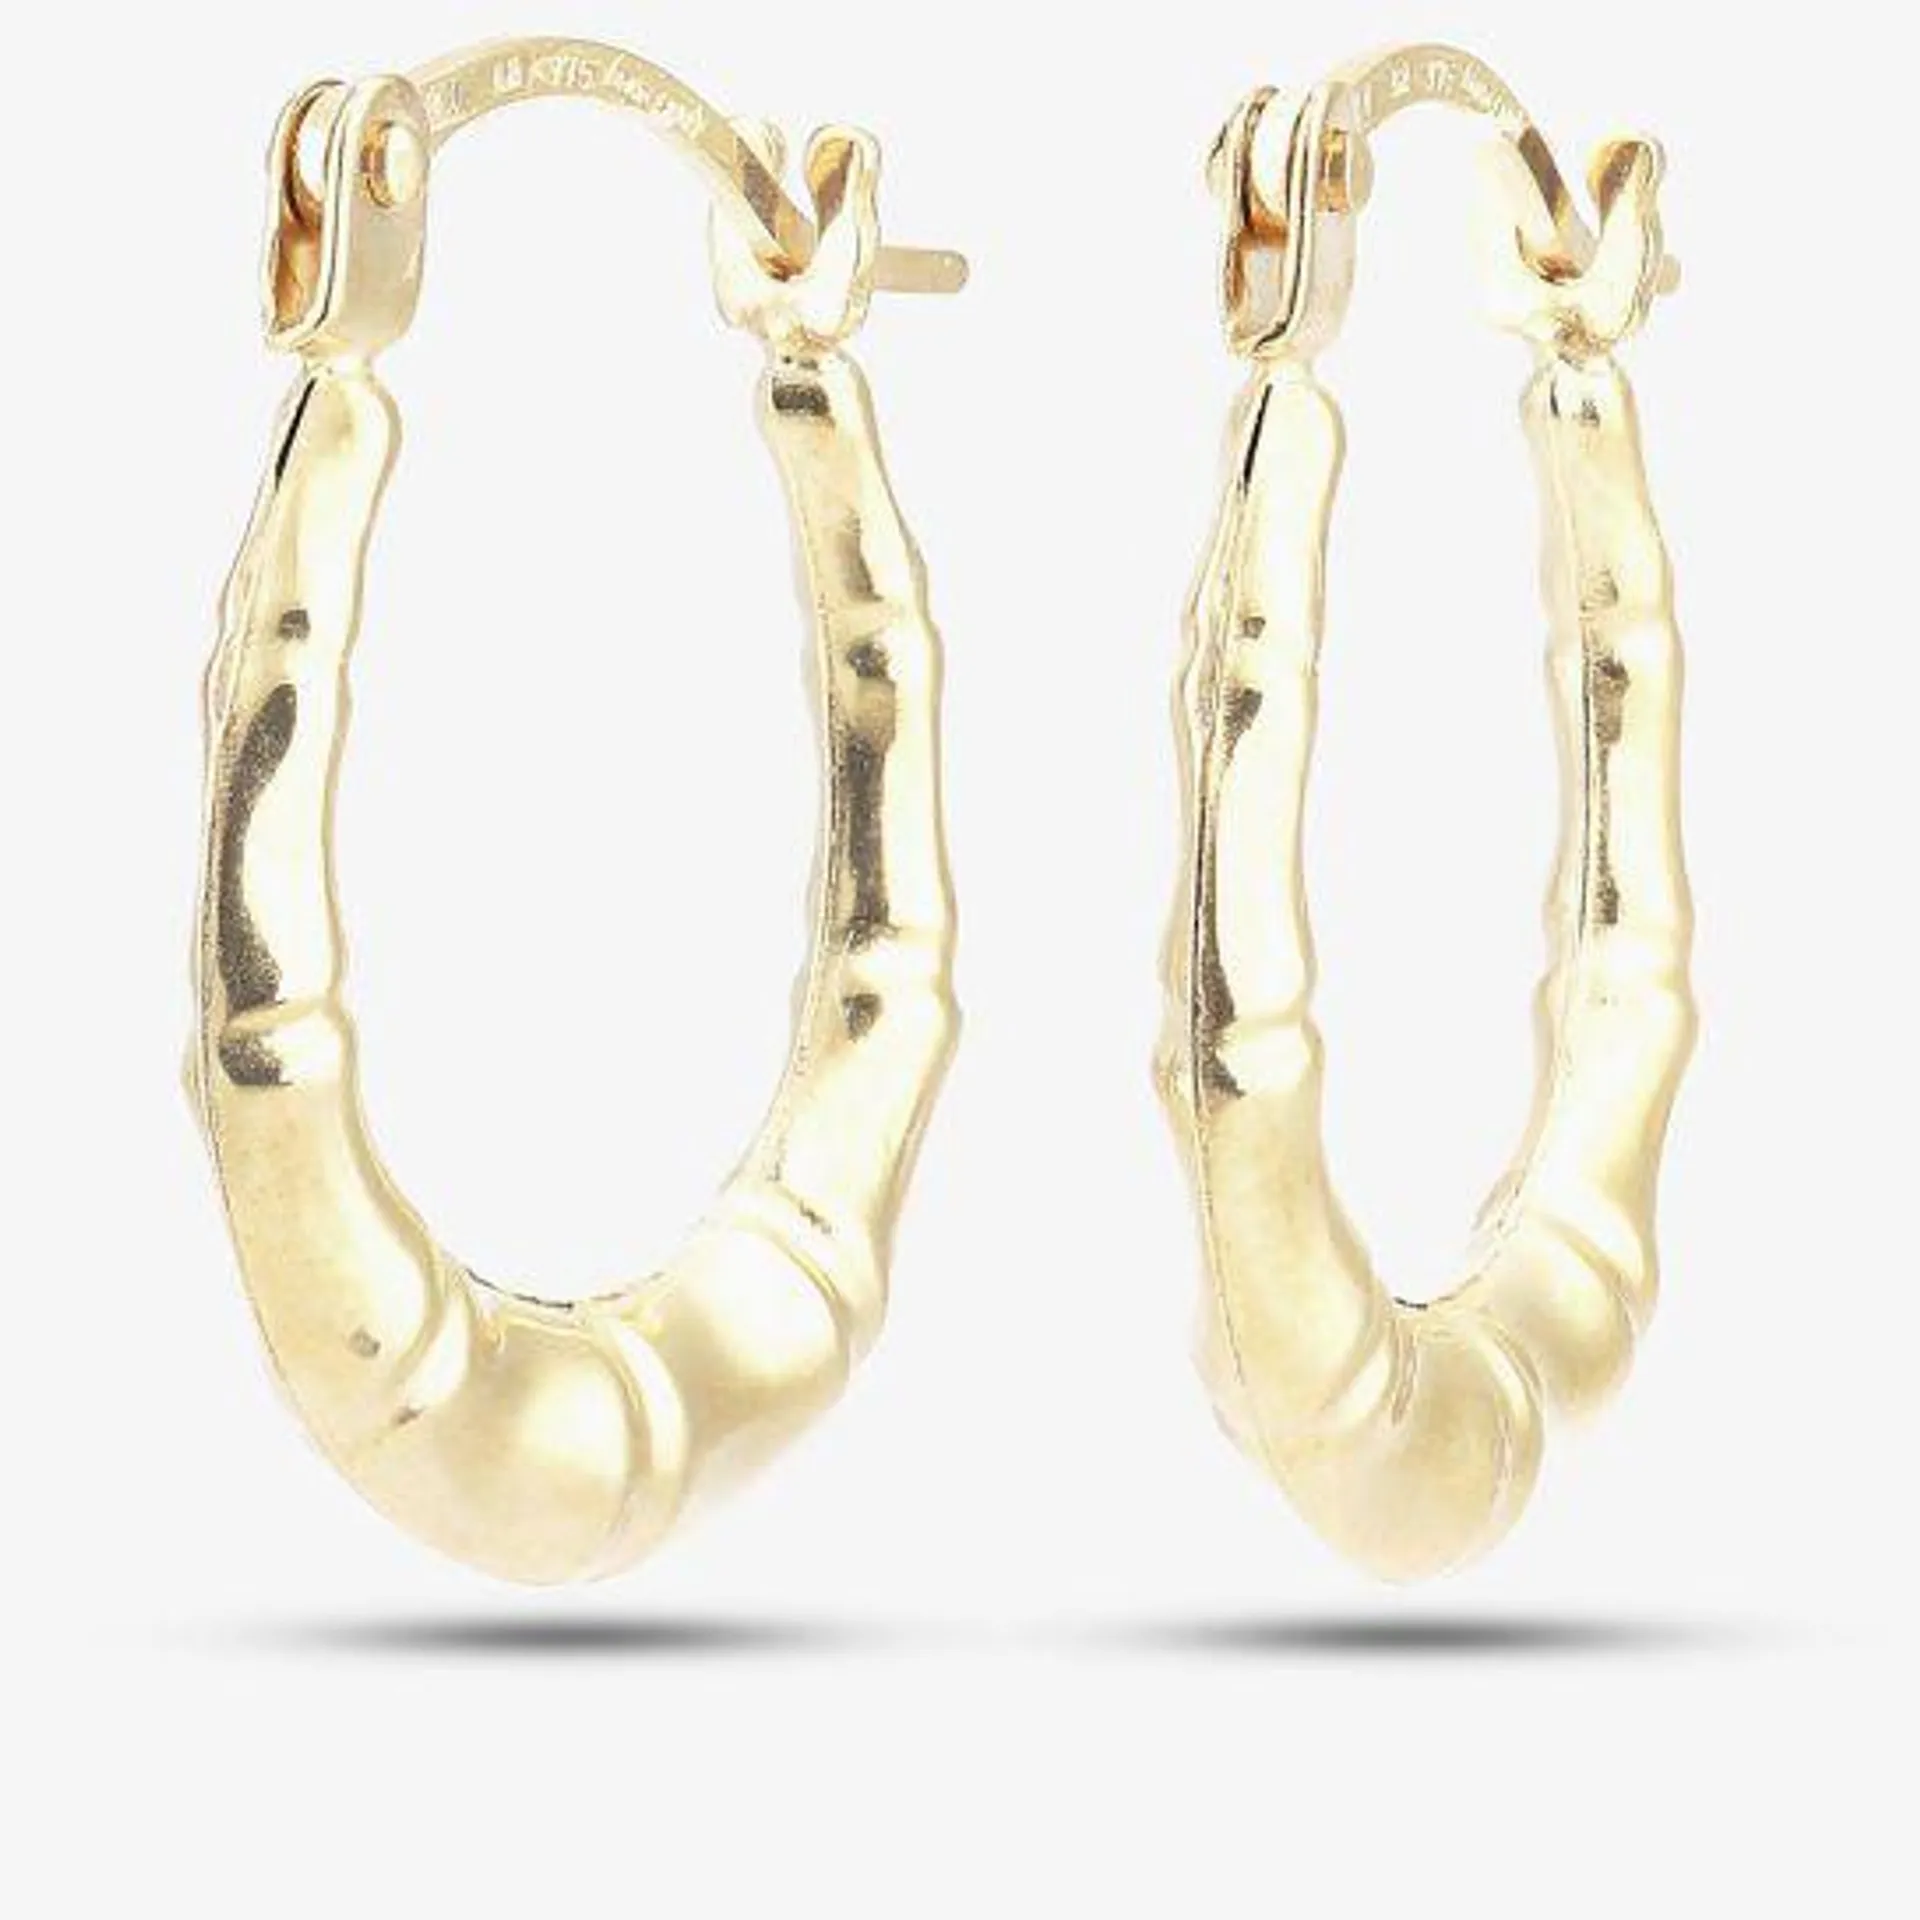 9ct Yellow Gold Small Patterned Oval Hoop Earrings UER127Y